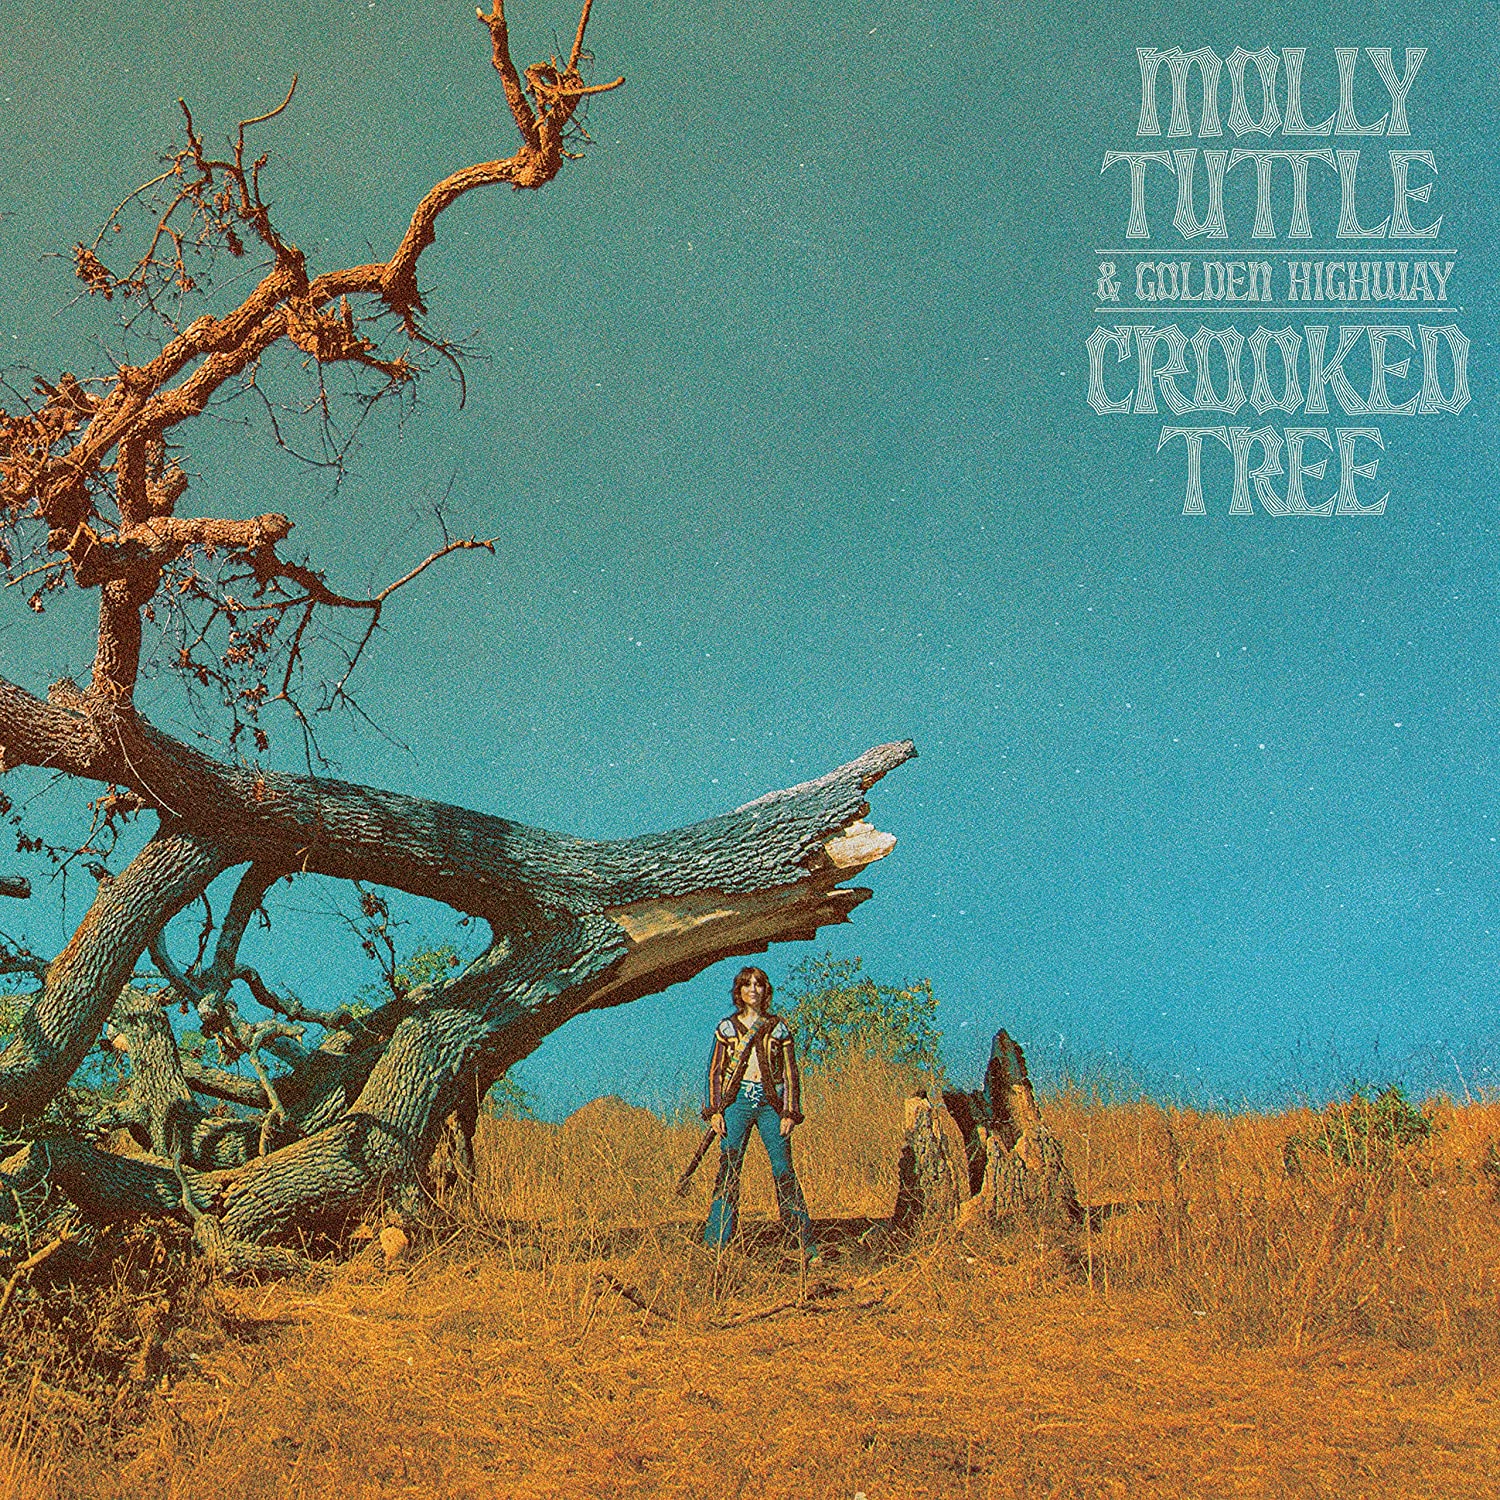 Review of Crooked Tree